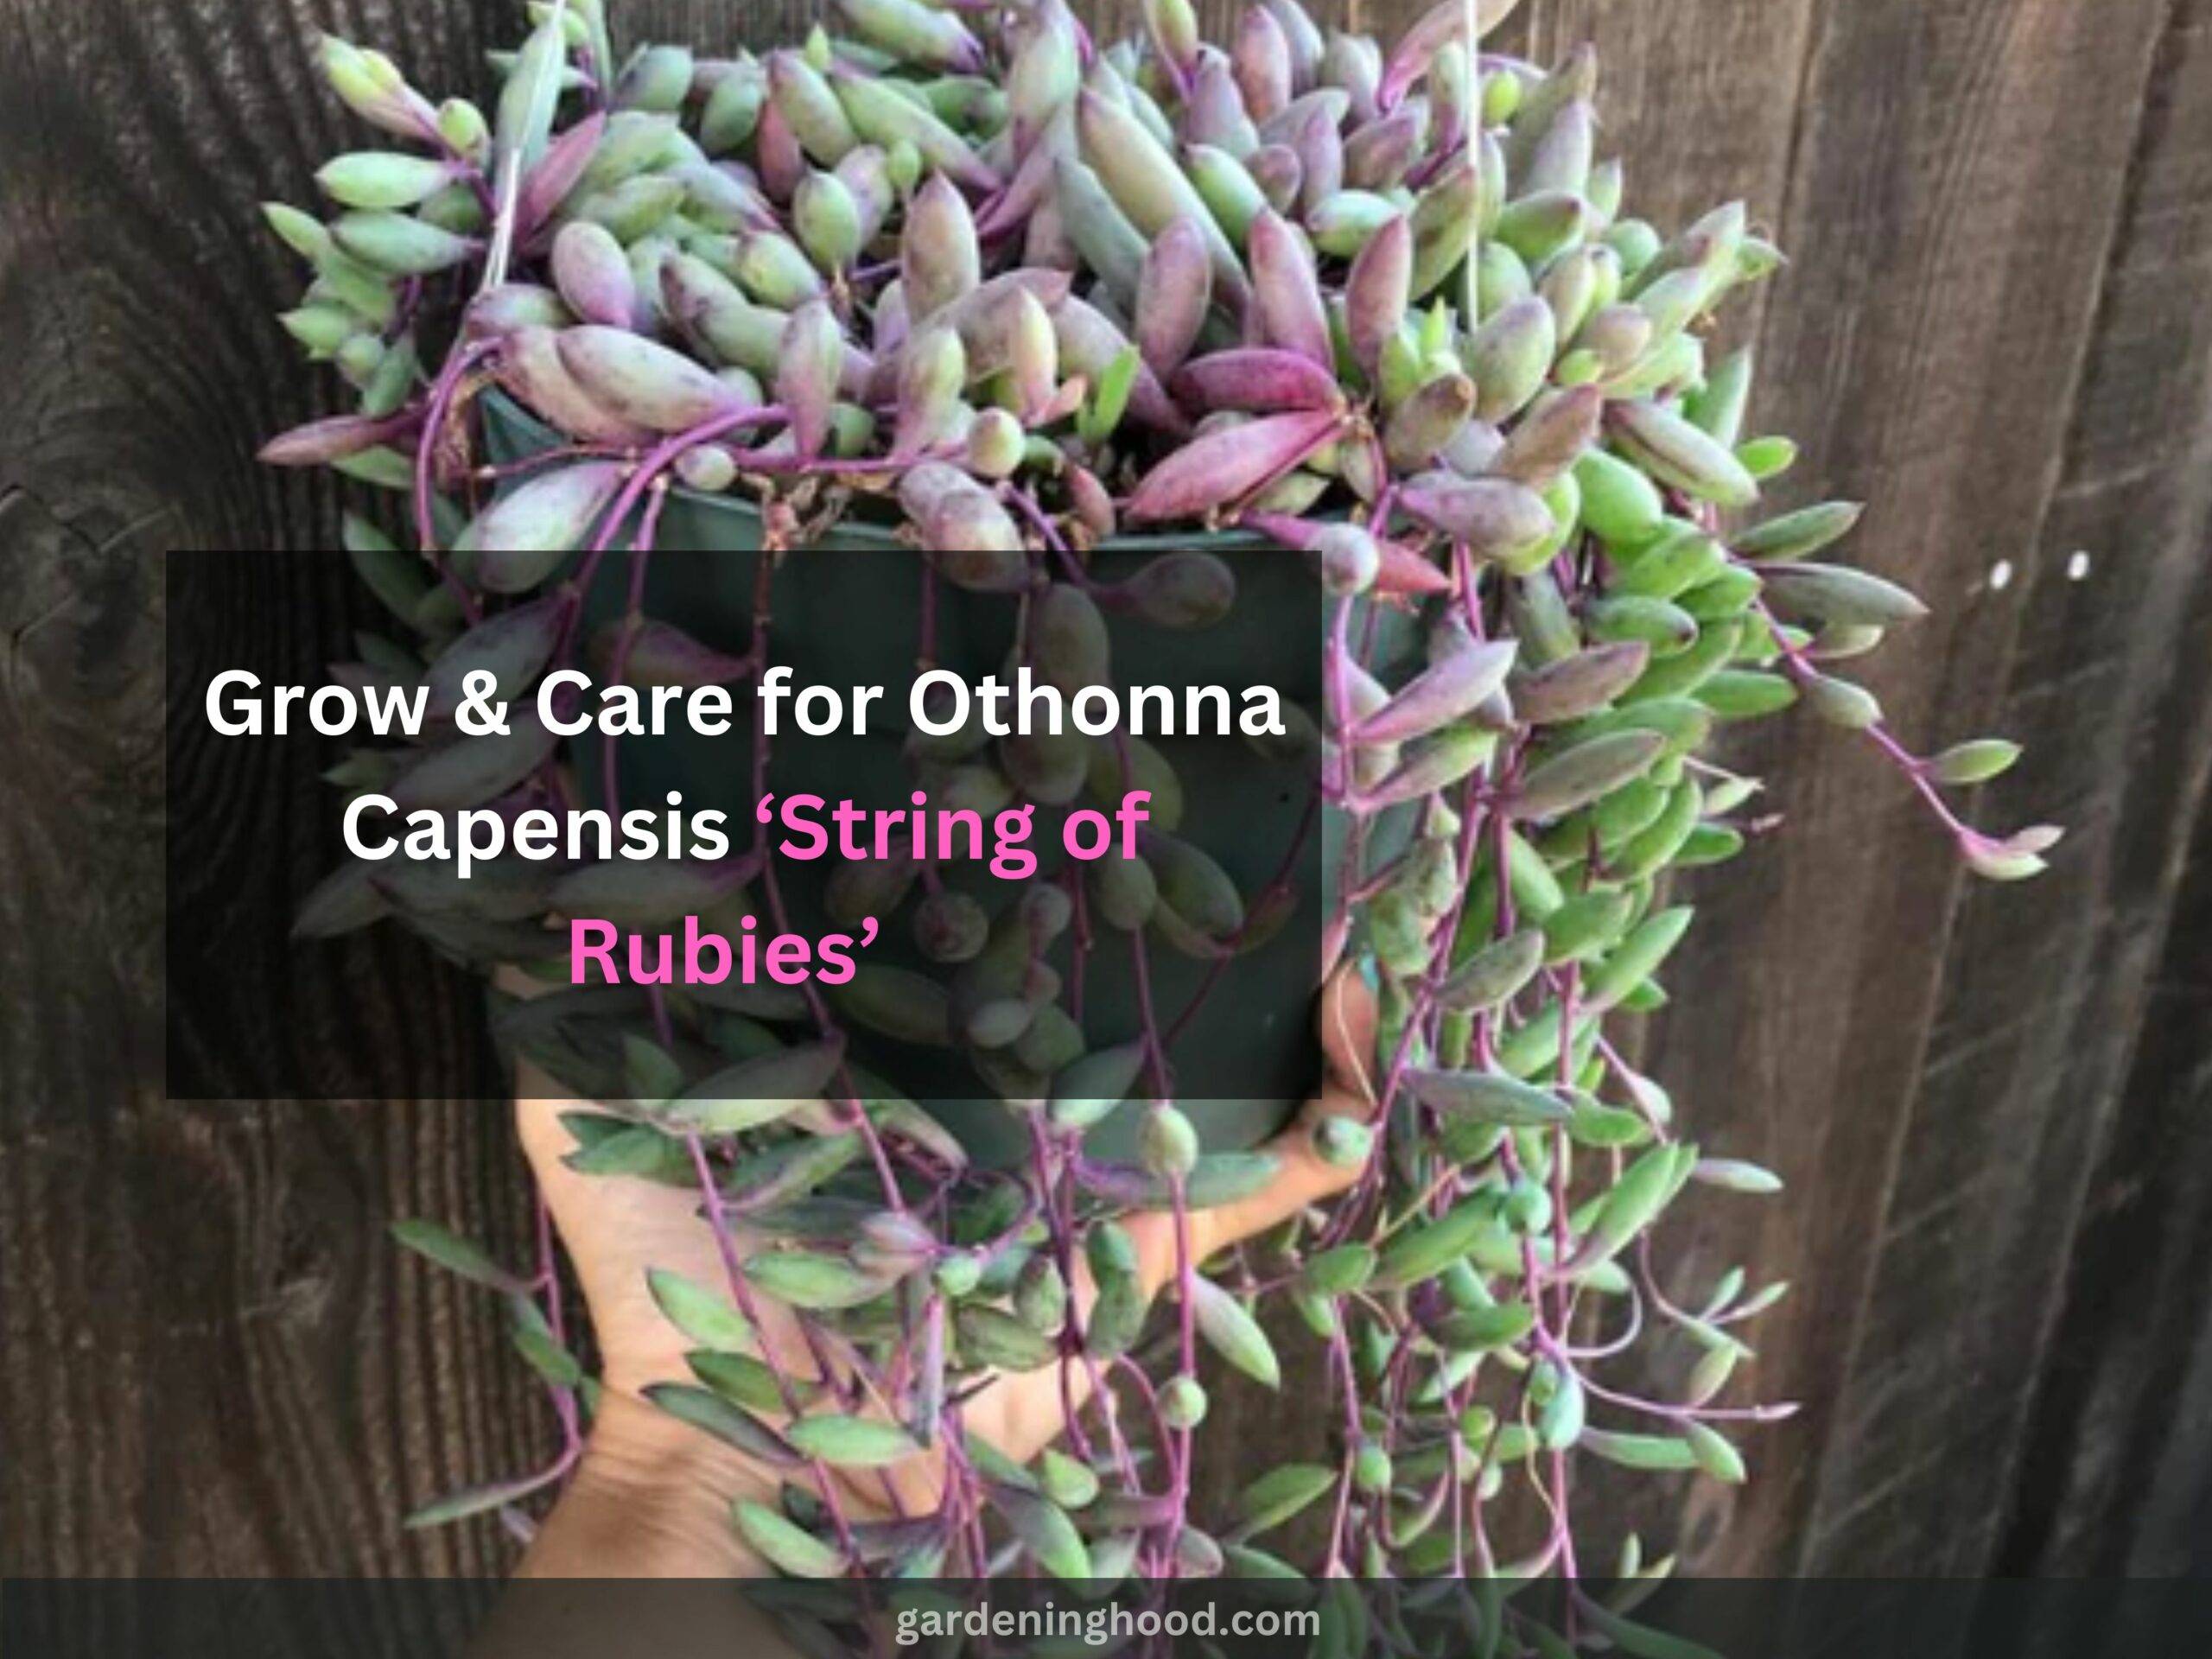 How to Grow & Care for Othonna Capensis ‘String of Rubies’ (2023)